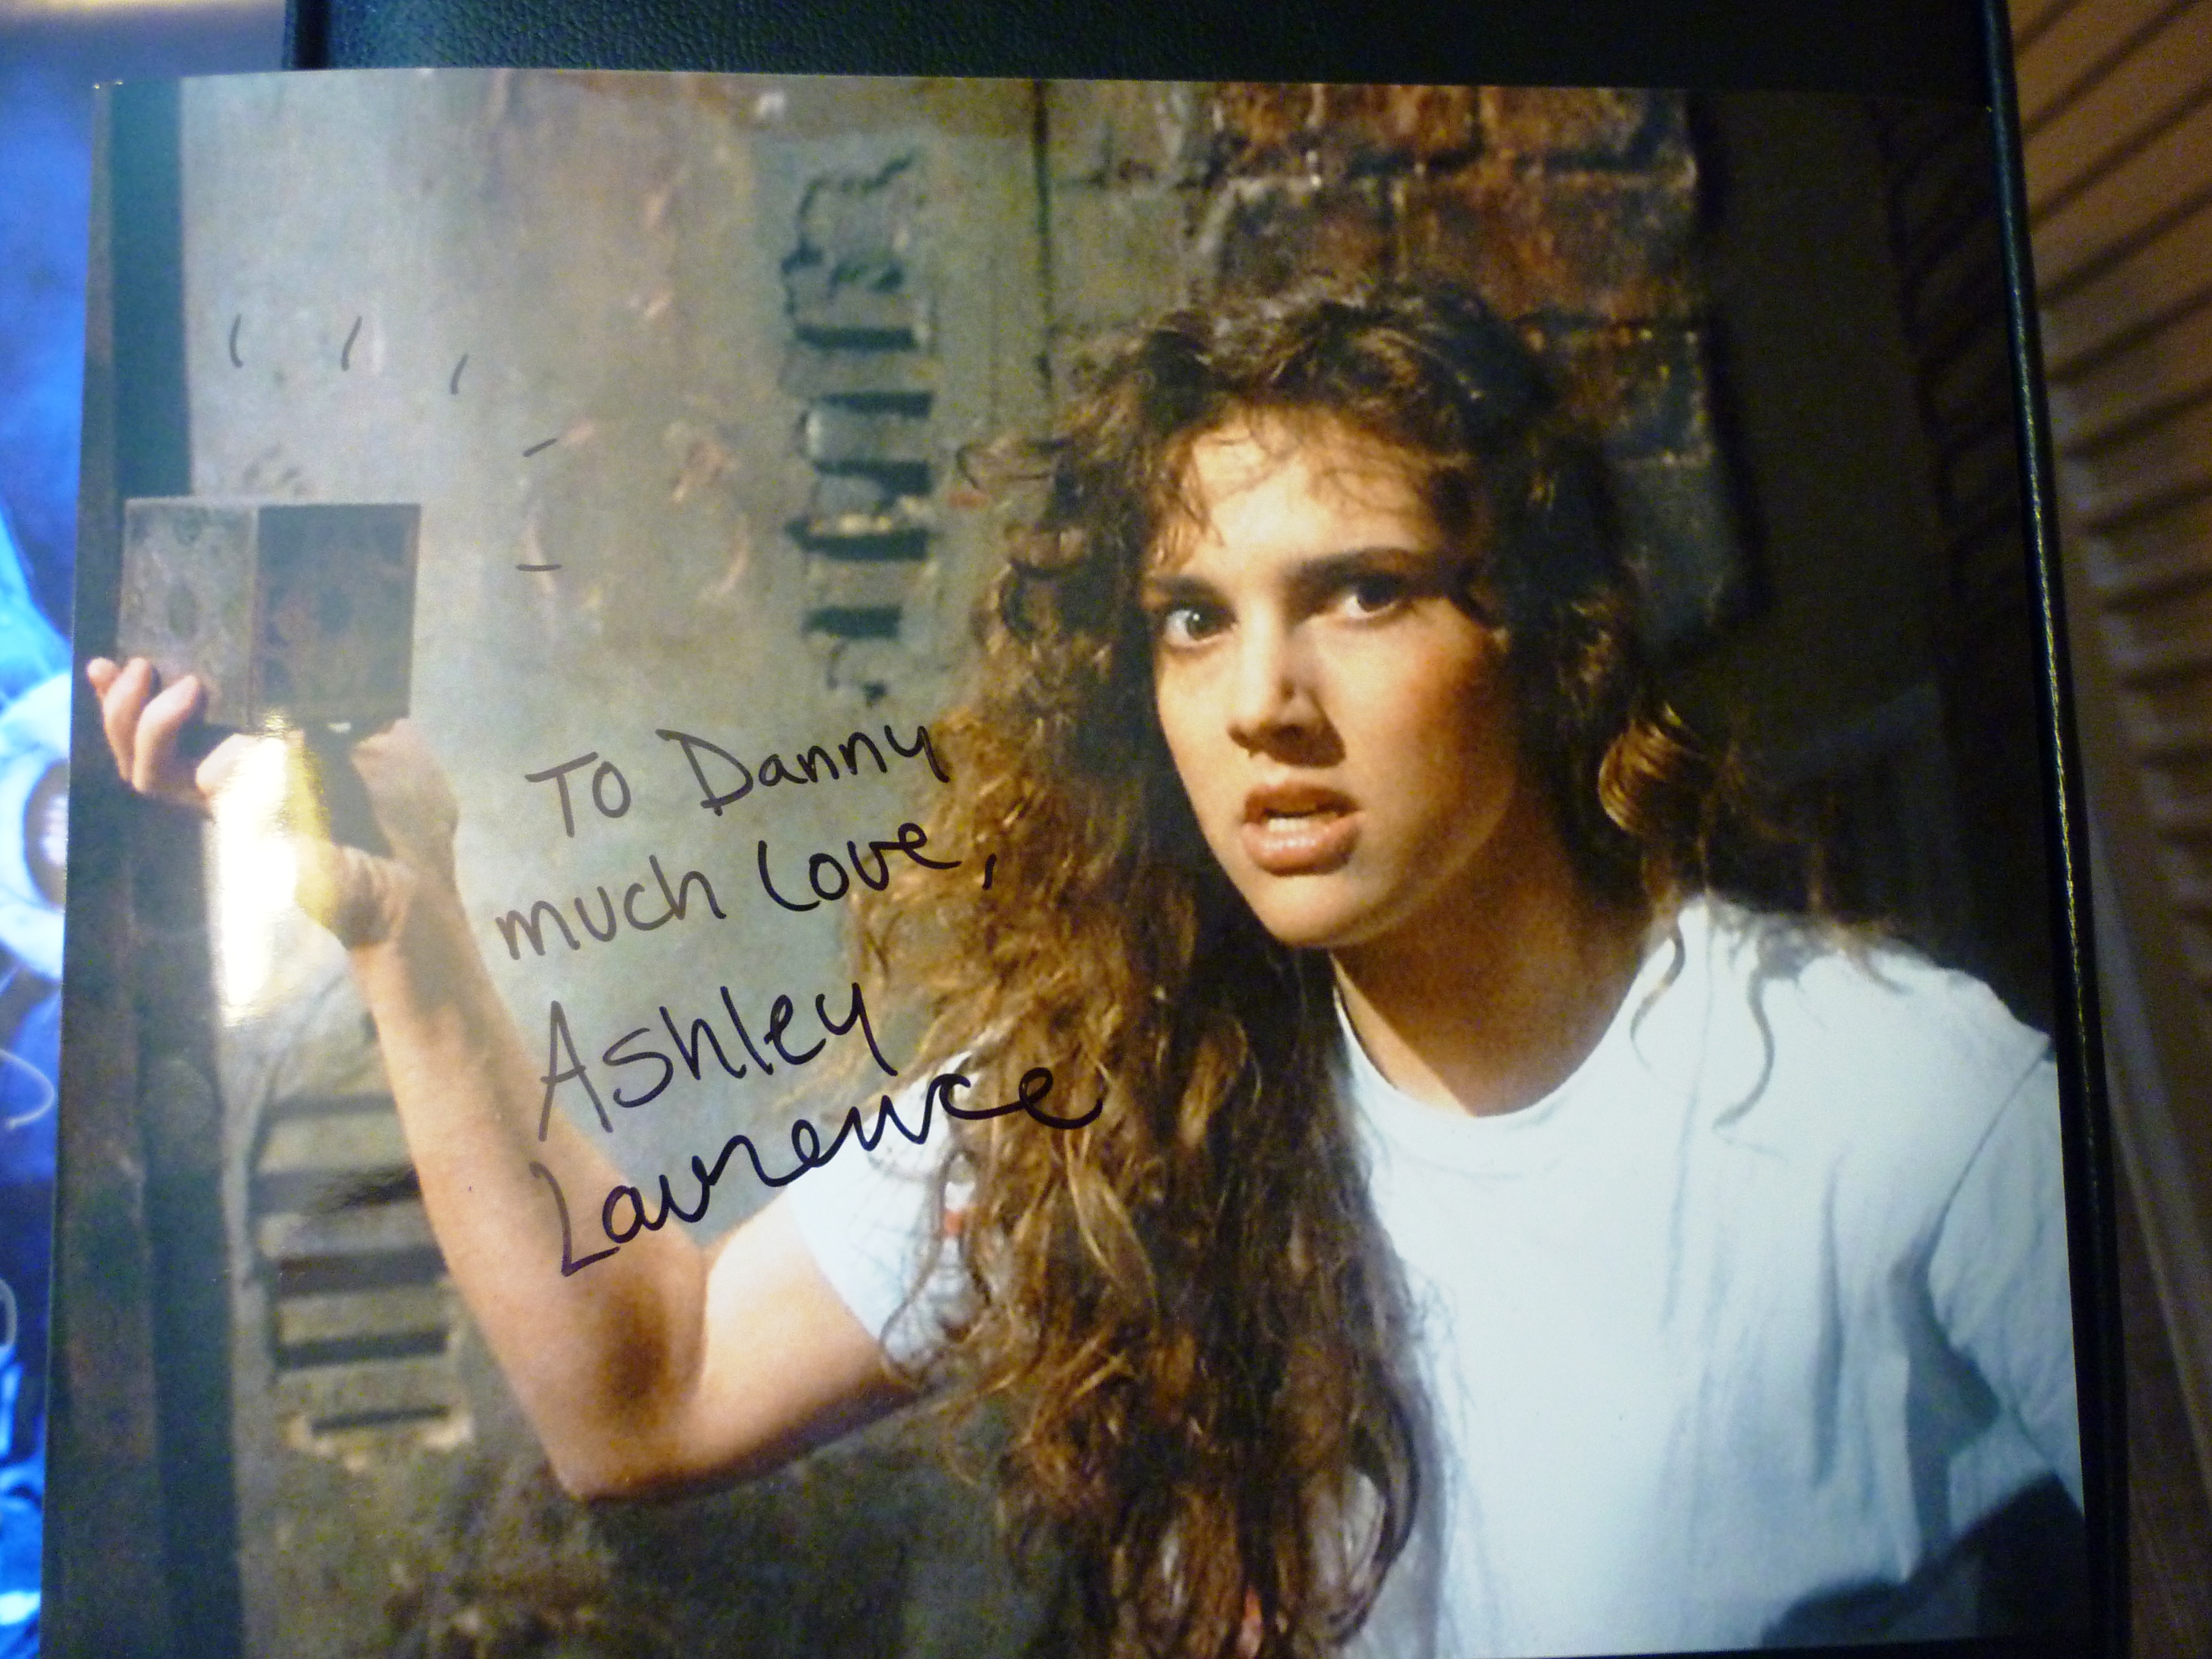 Ashley Laurence Photos : ashley lawrence myspace image search results.